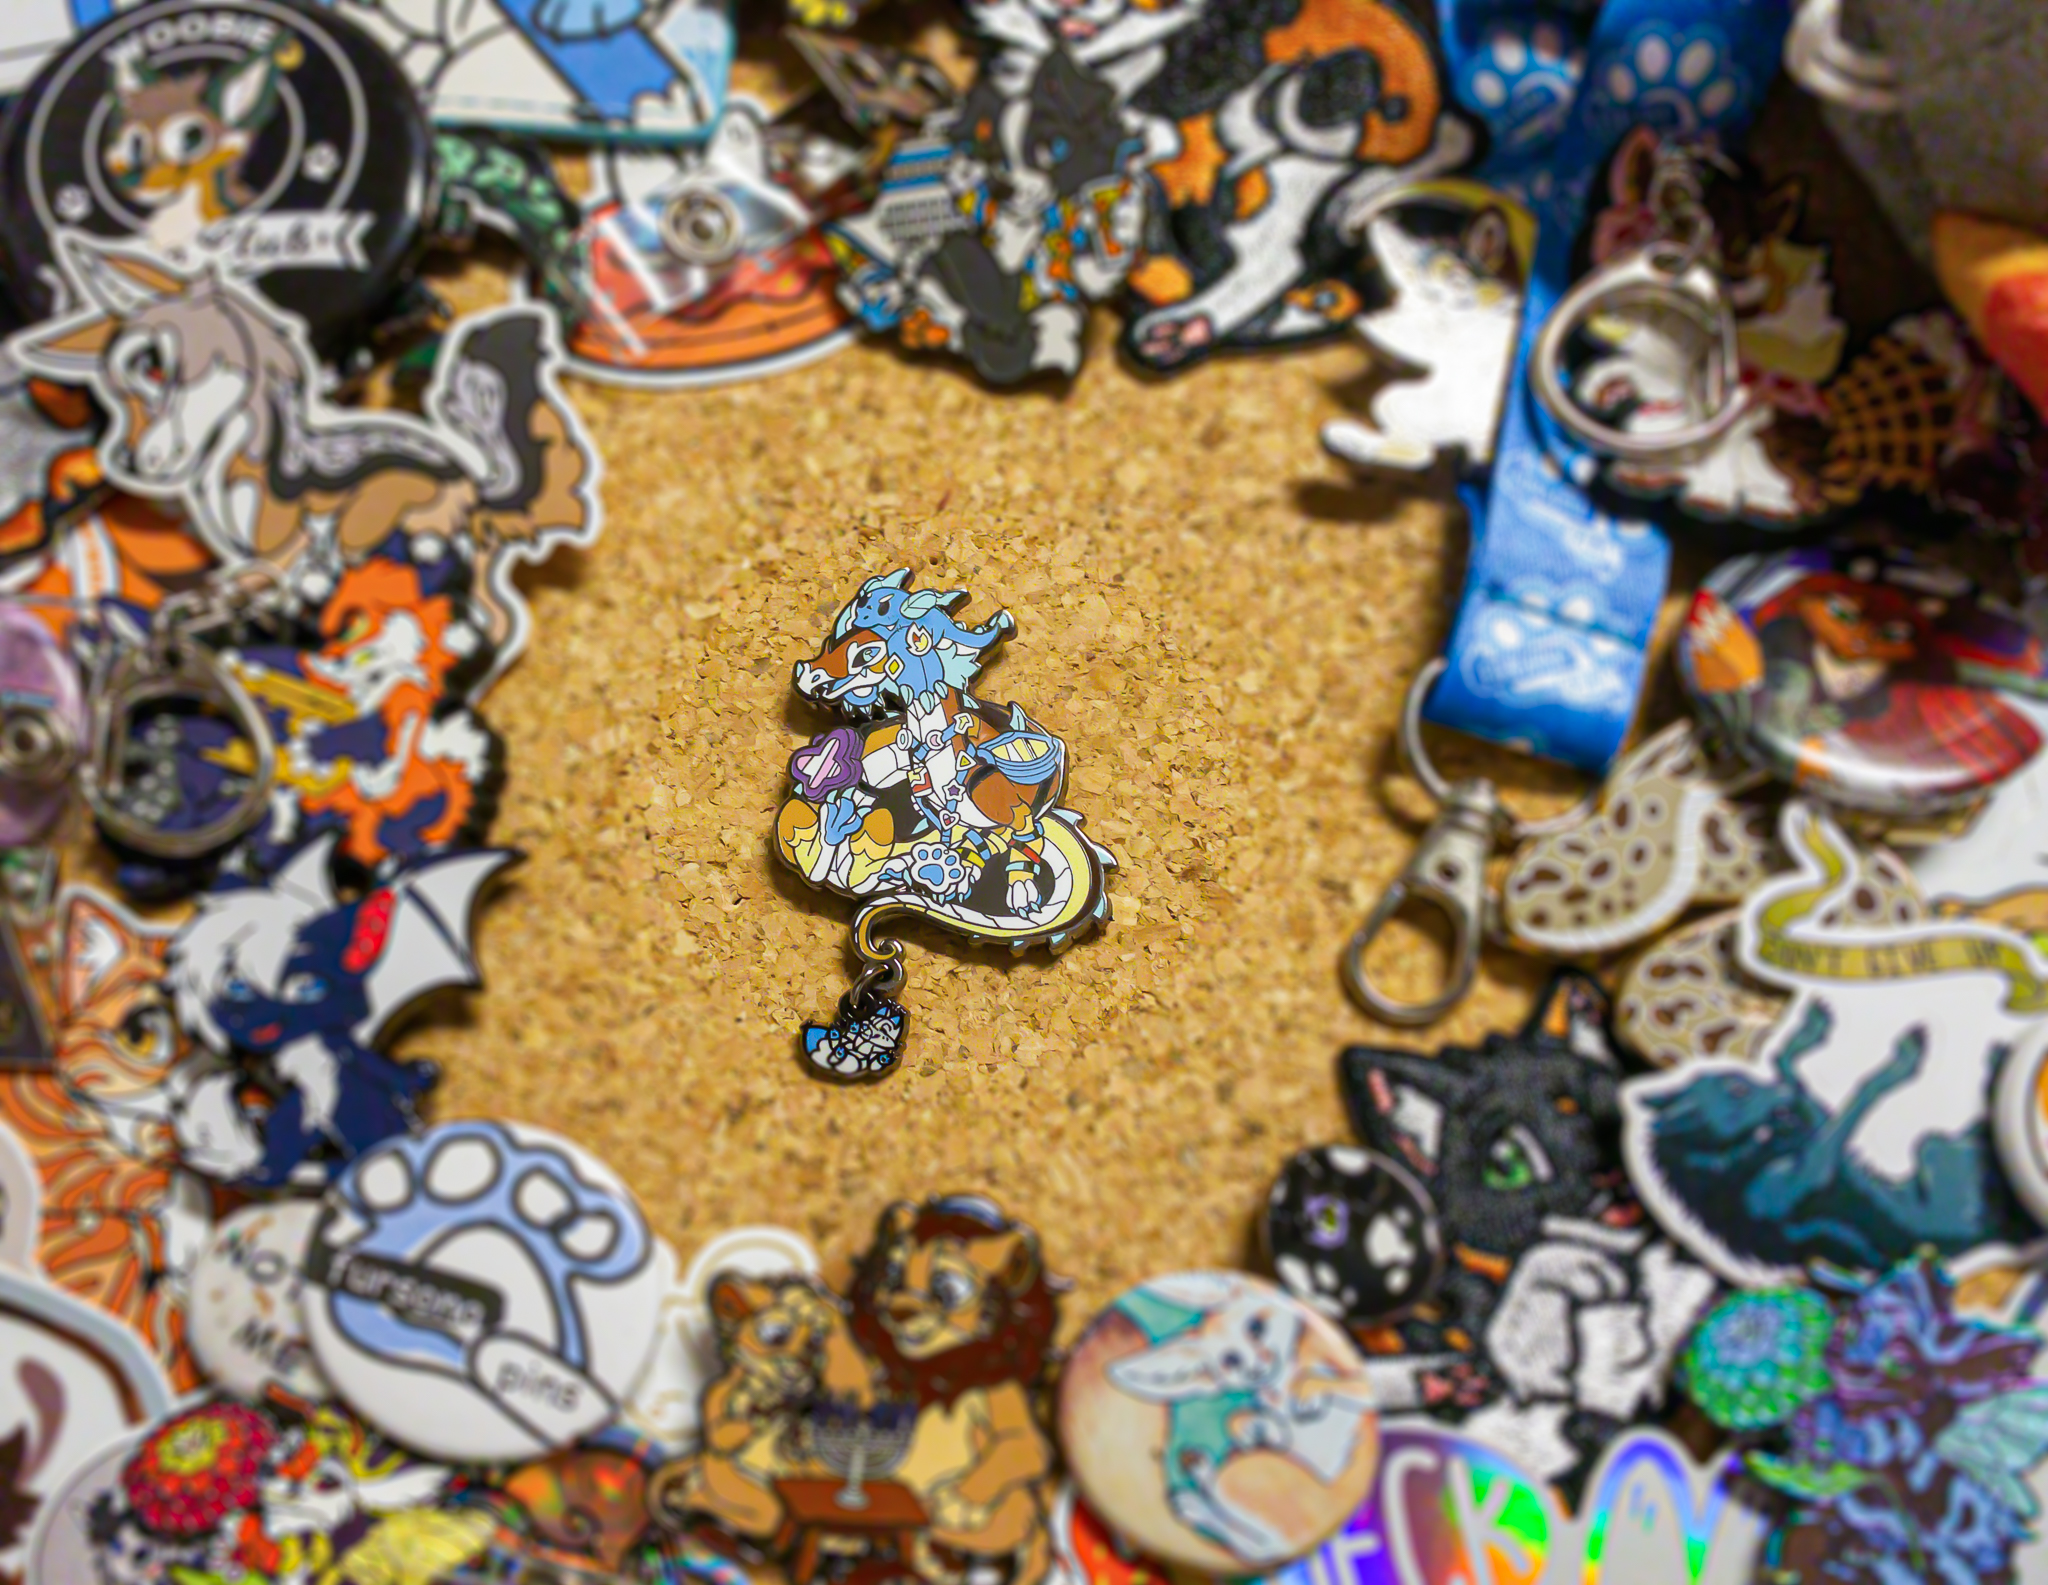 The pin, with the dragon's hoard!